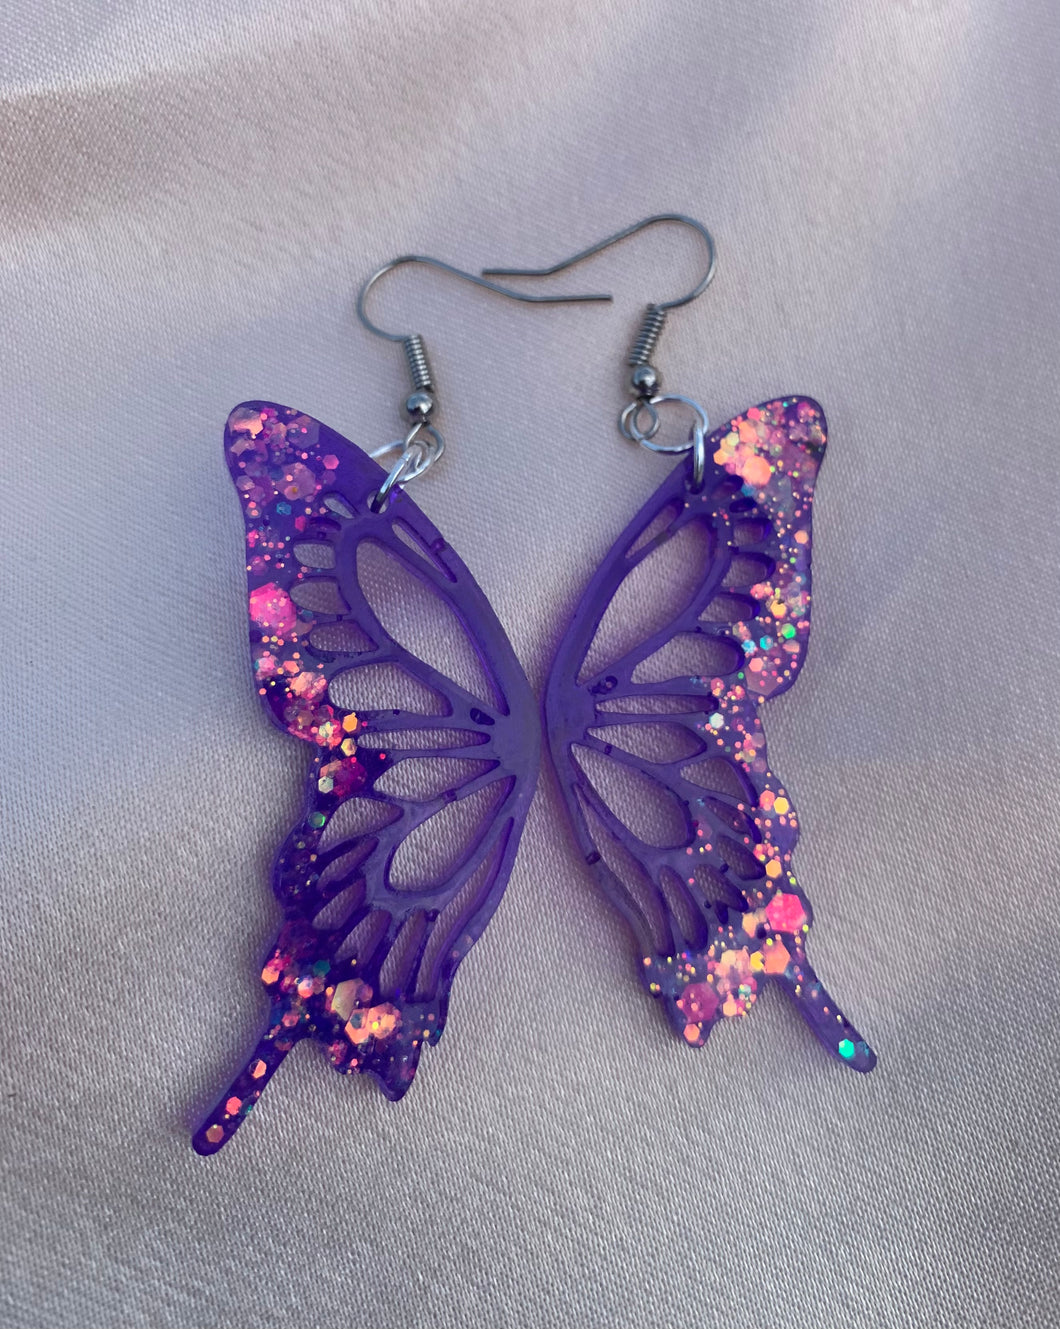 Stained glass butterfly wing earrings (lined)